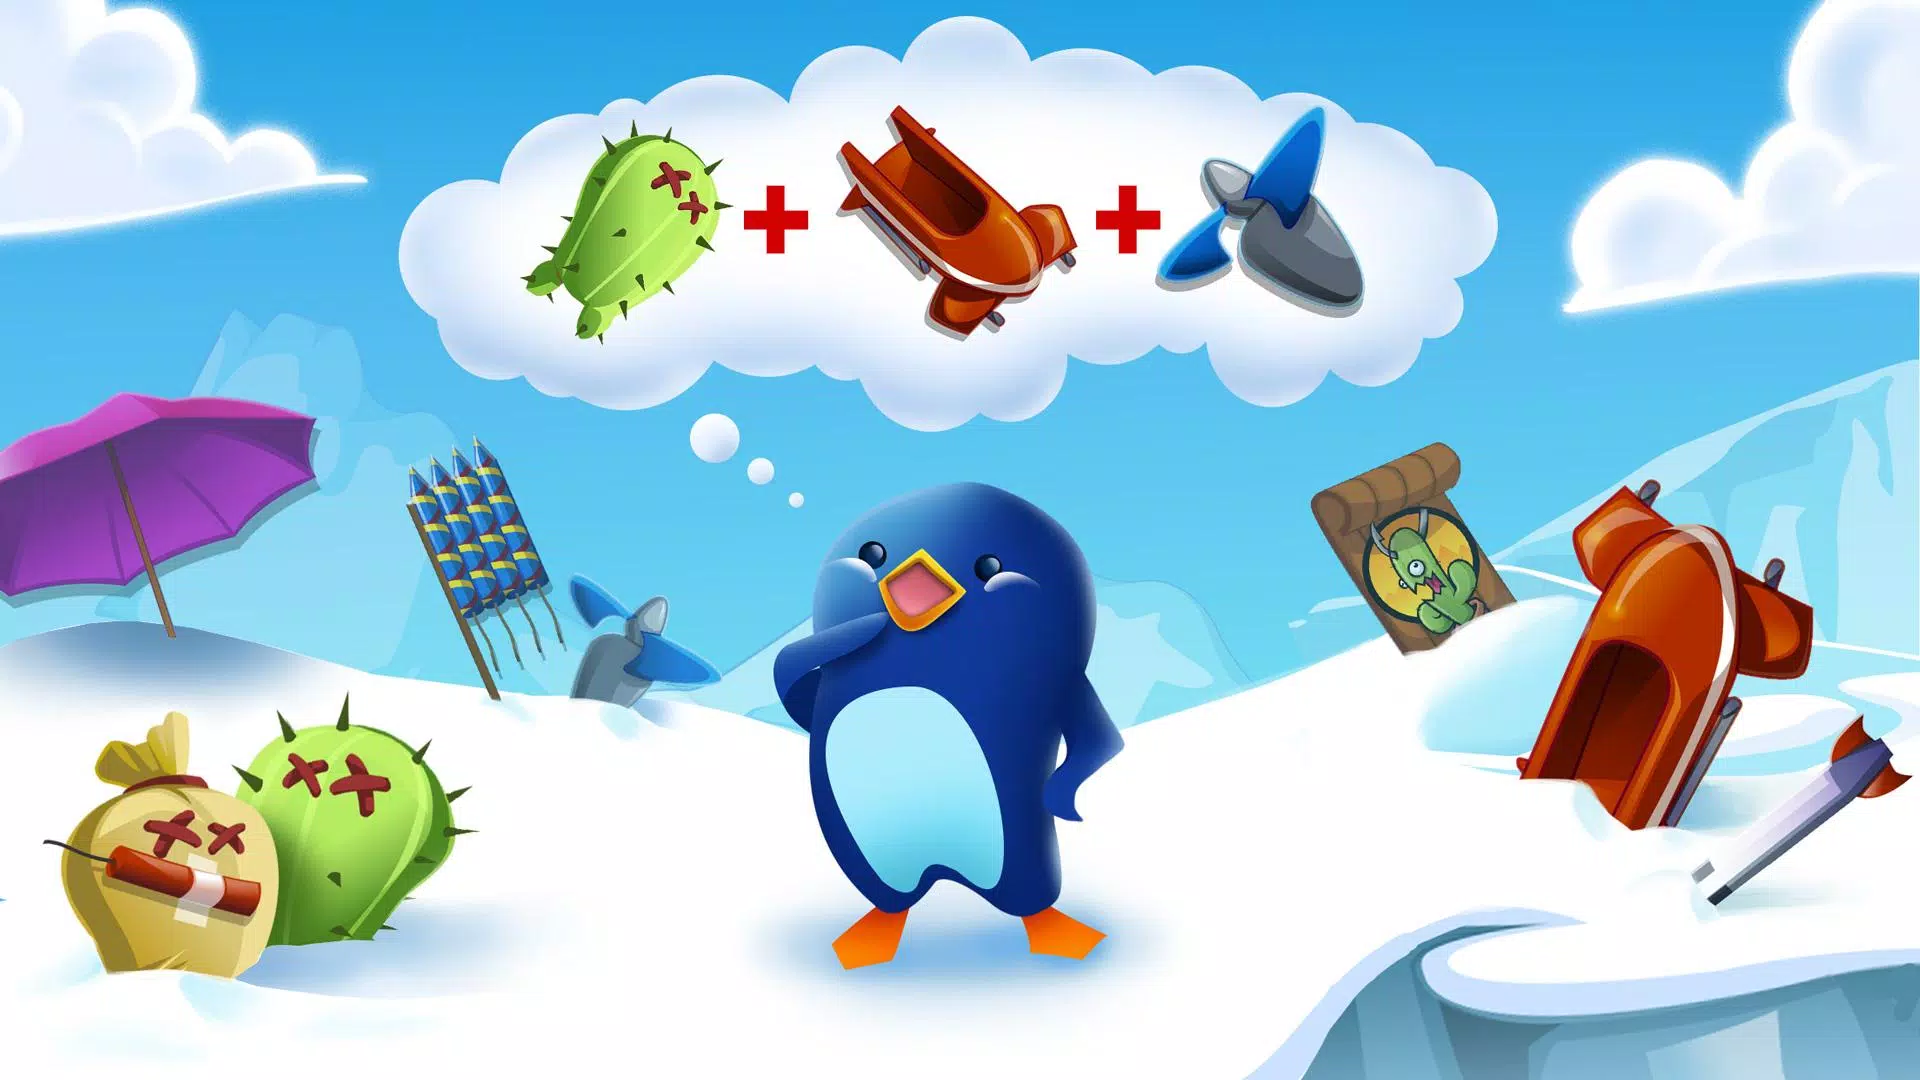 Stream Download Learn to Fly 3 APK for Android - The Ultimate